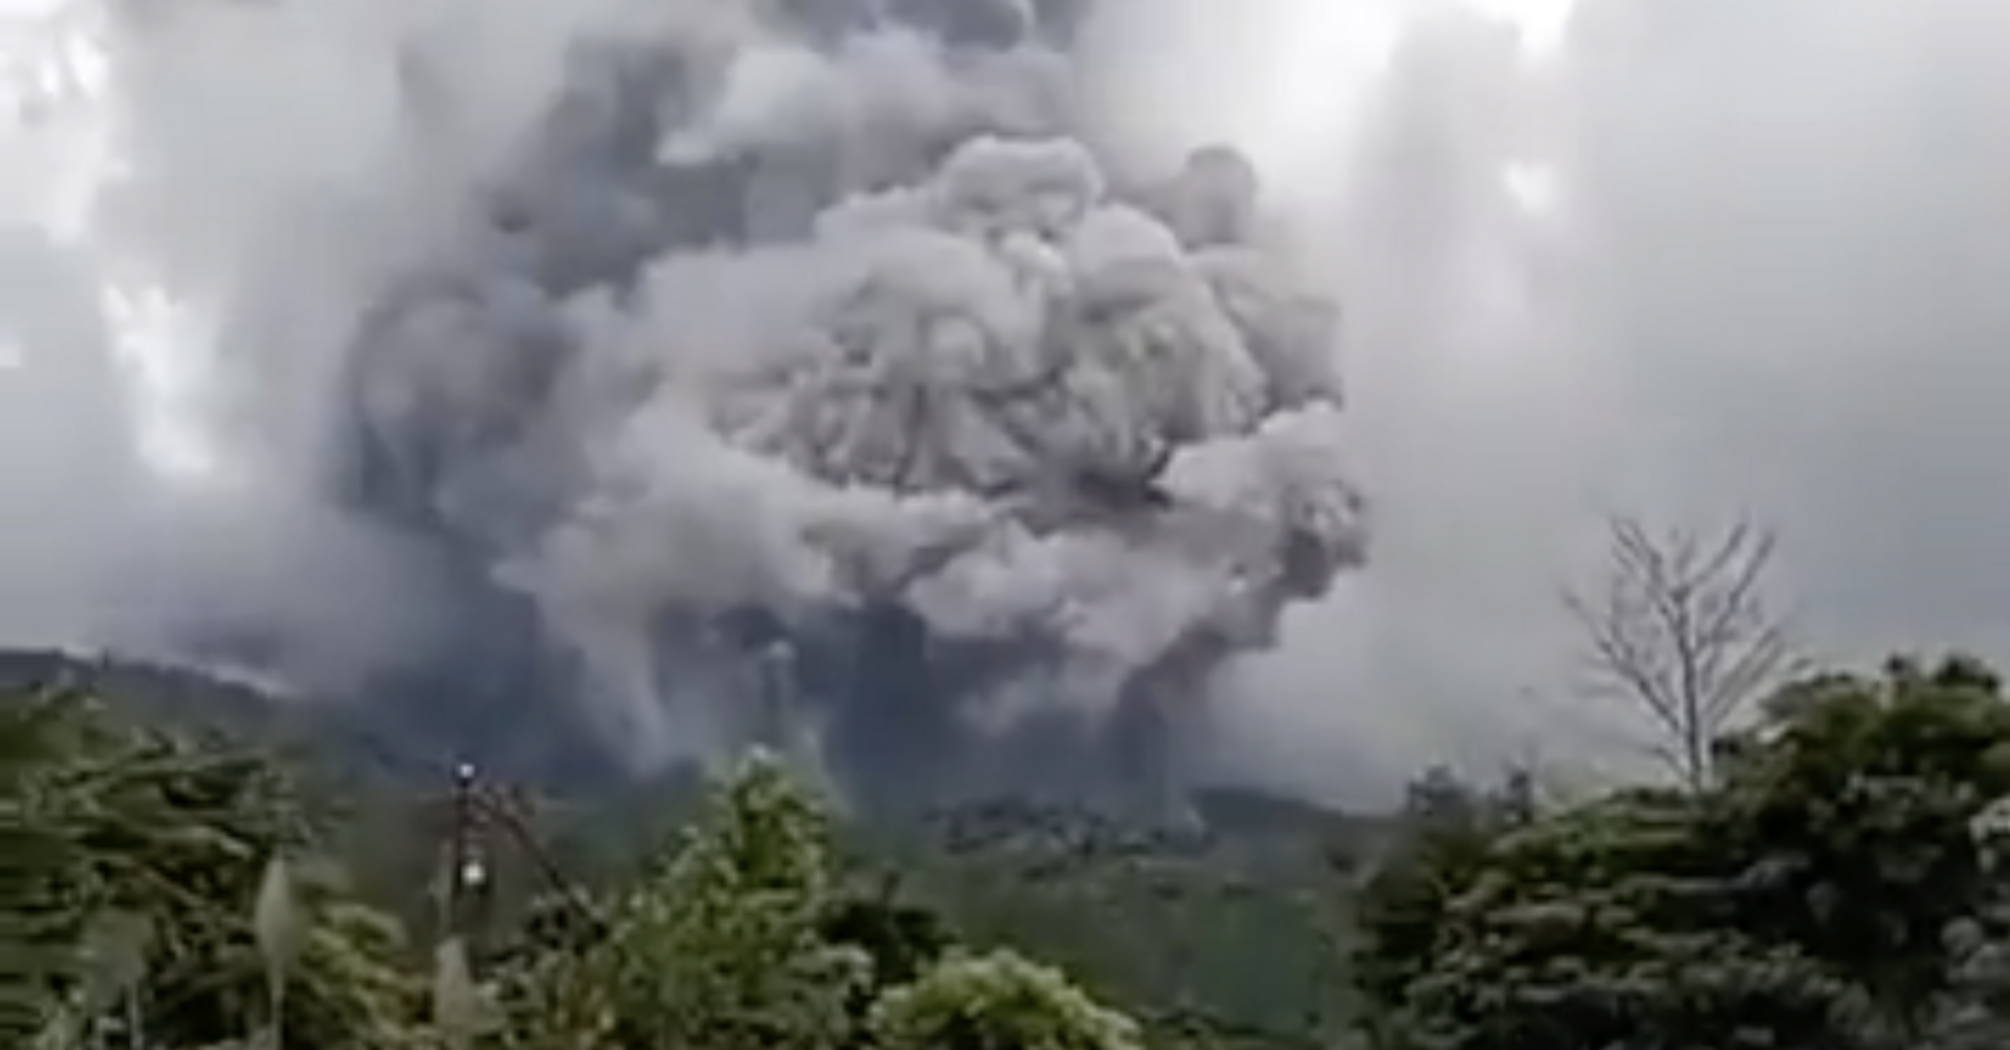 The Indonesian volcano Merapi has started erupting: ash covers several villages nearby